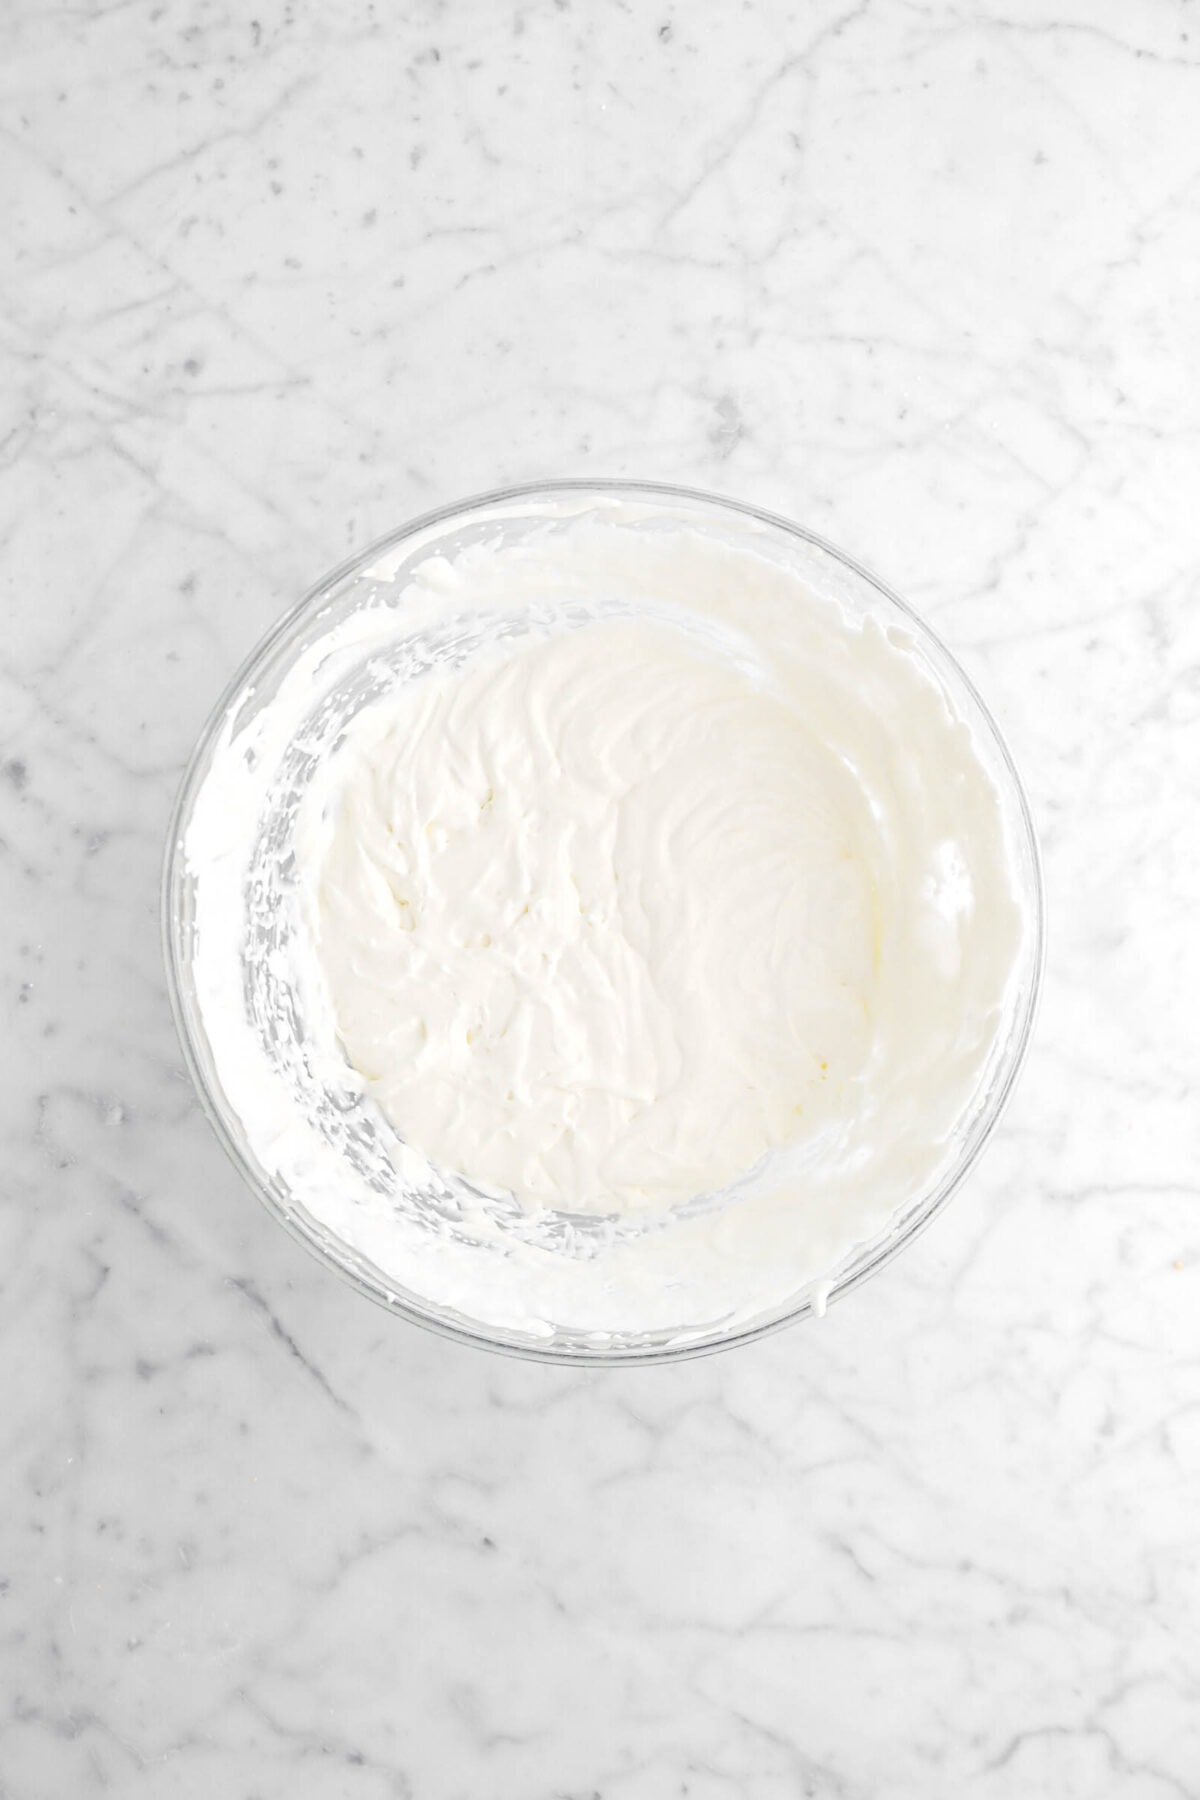 whipped heavy cream in glass bowl